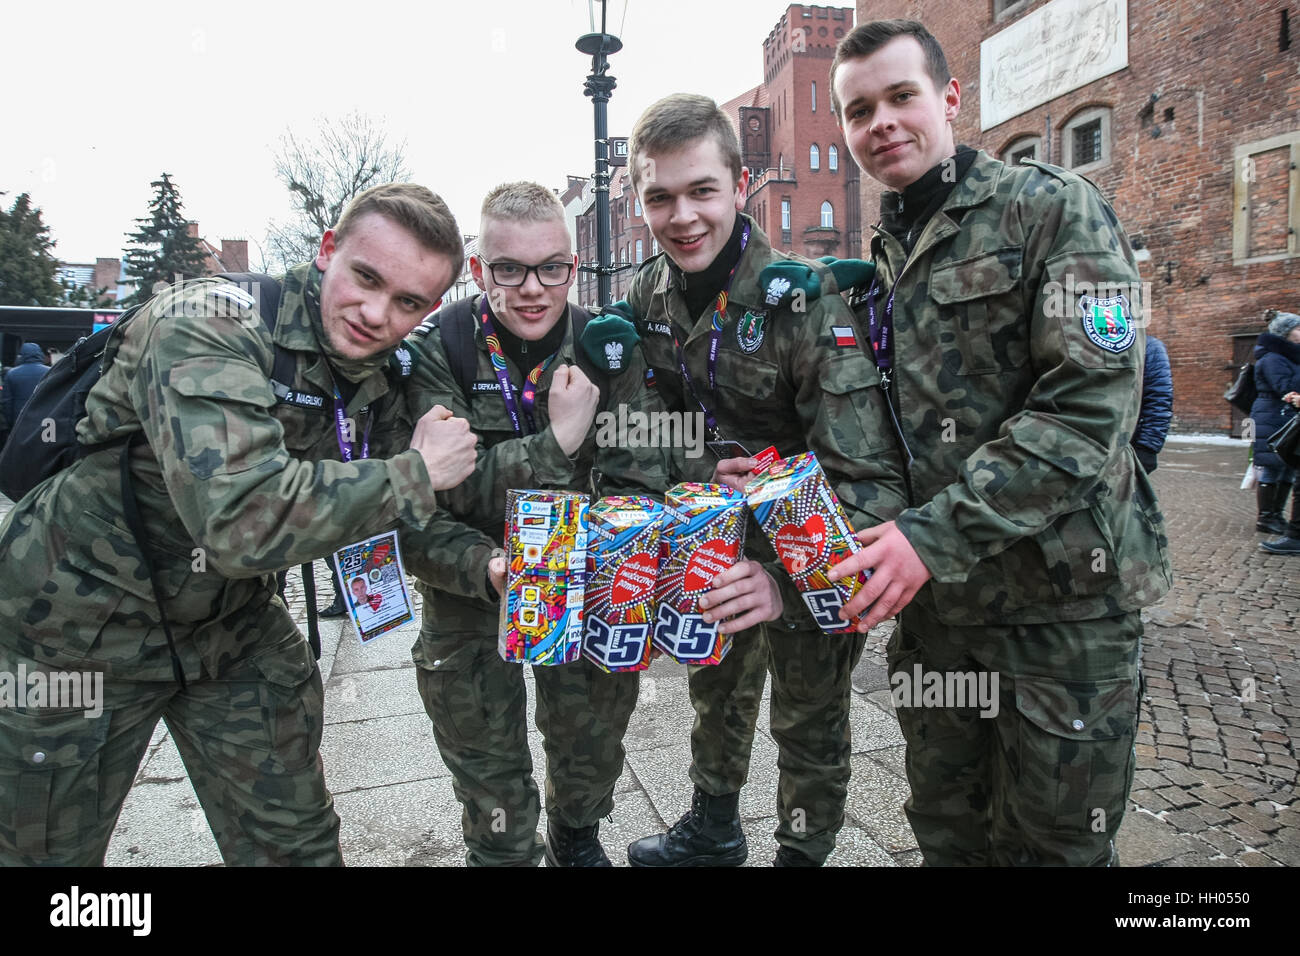 Gdansk, Poland. 15th January 2017. Volunteers in military uniforms collecting money are seen during 25th Grand Finale of Great Orchestra of Christmas Charity (WOSP) on January 15th, 2017 in Gdansk. Over 120 thousands of volunteers across the Poland collect money on the streets in special cans labelled with a red heart. This year finale is once again devoted to paediatrics and geriatrics. Credit: Michal Fludra/Alamy Live News Stock Photo